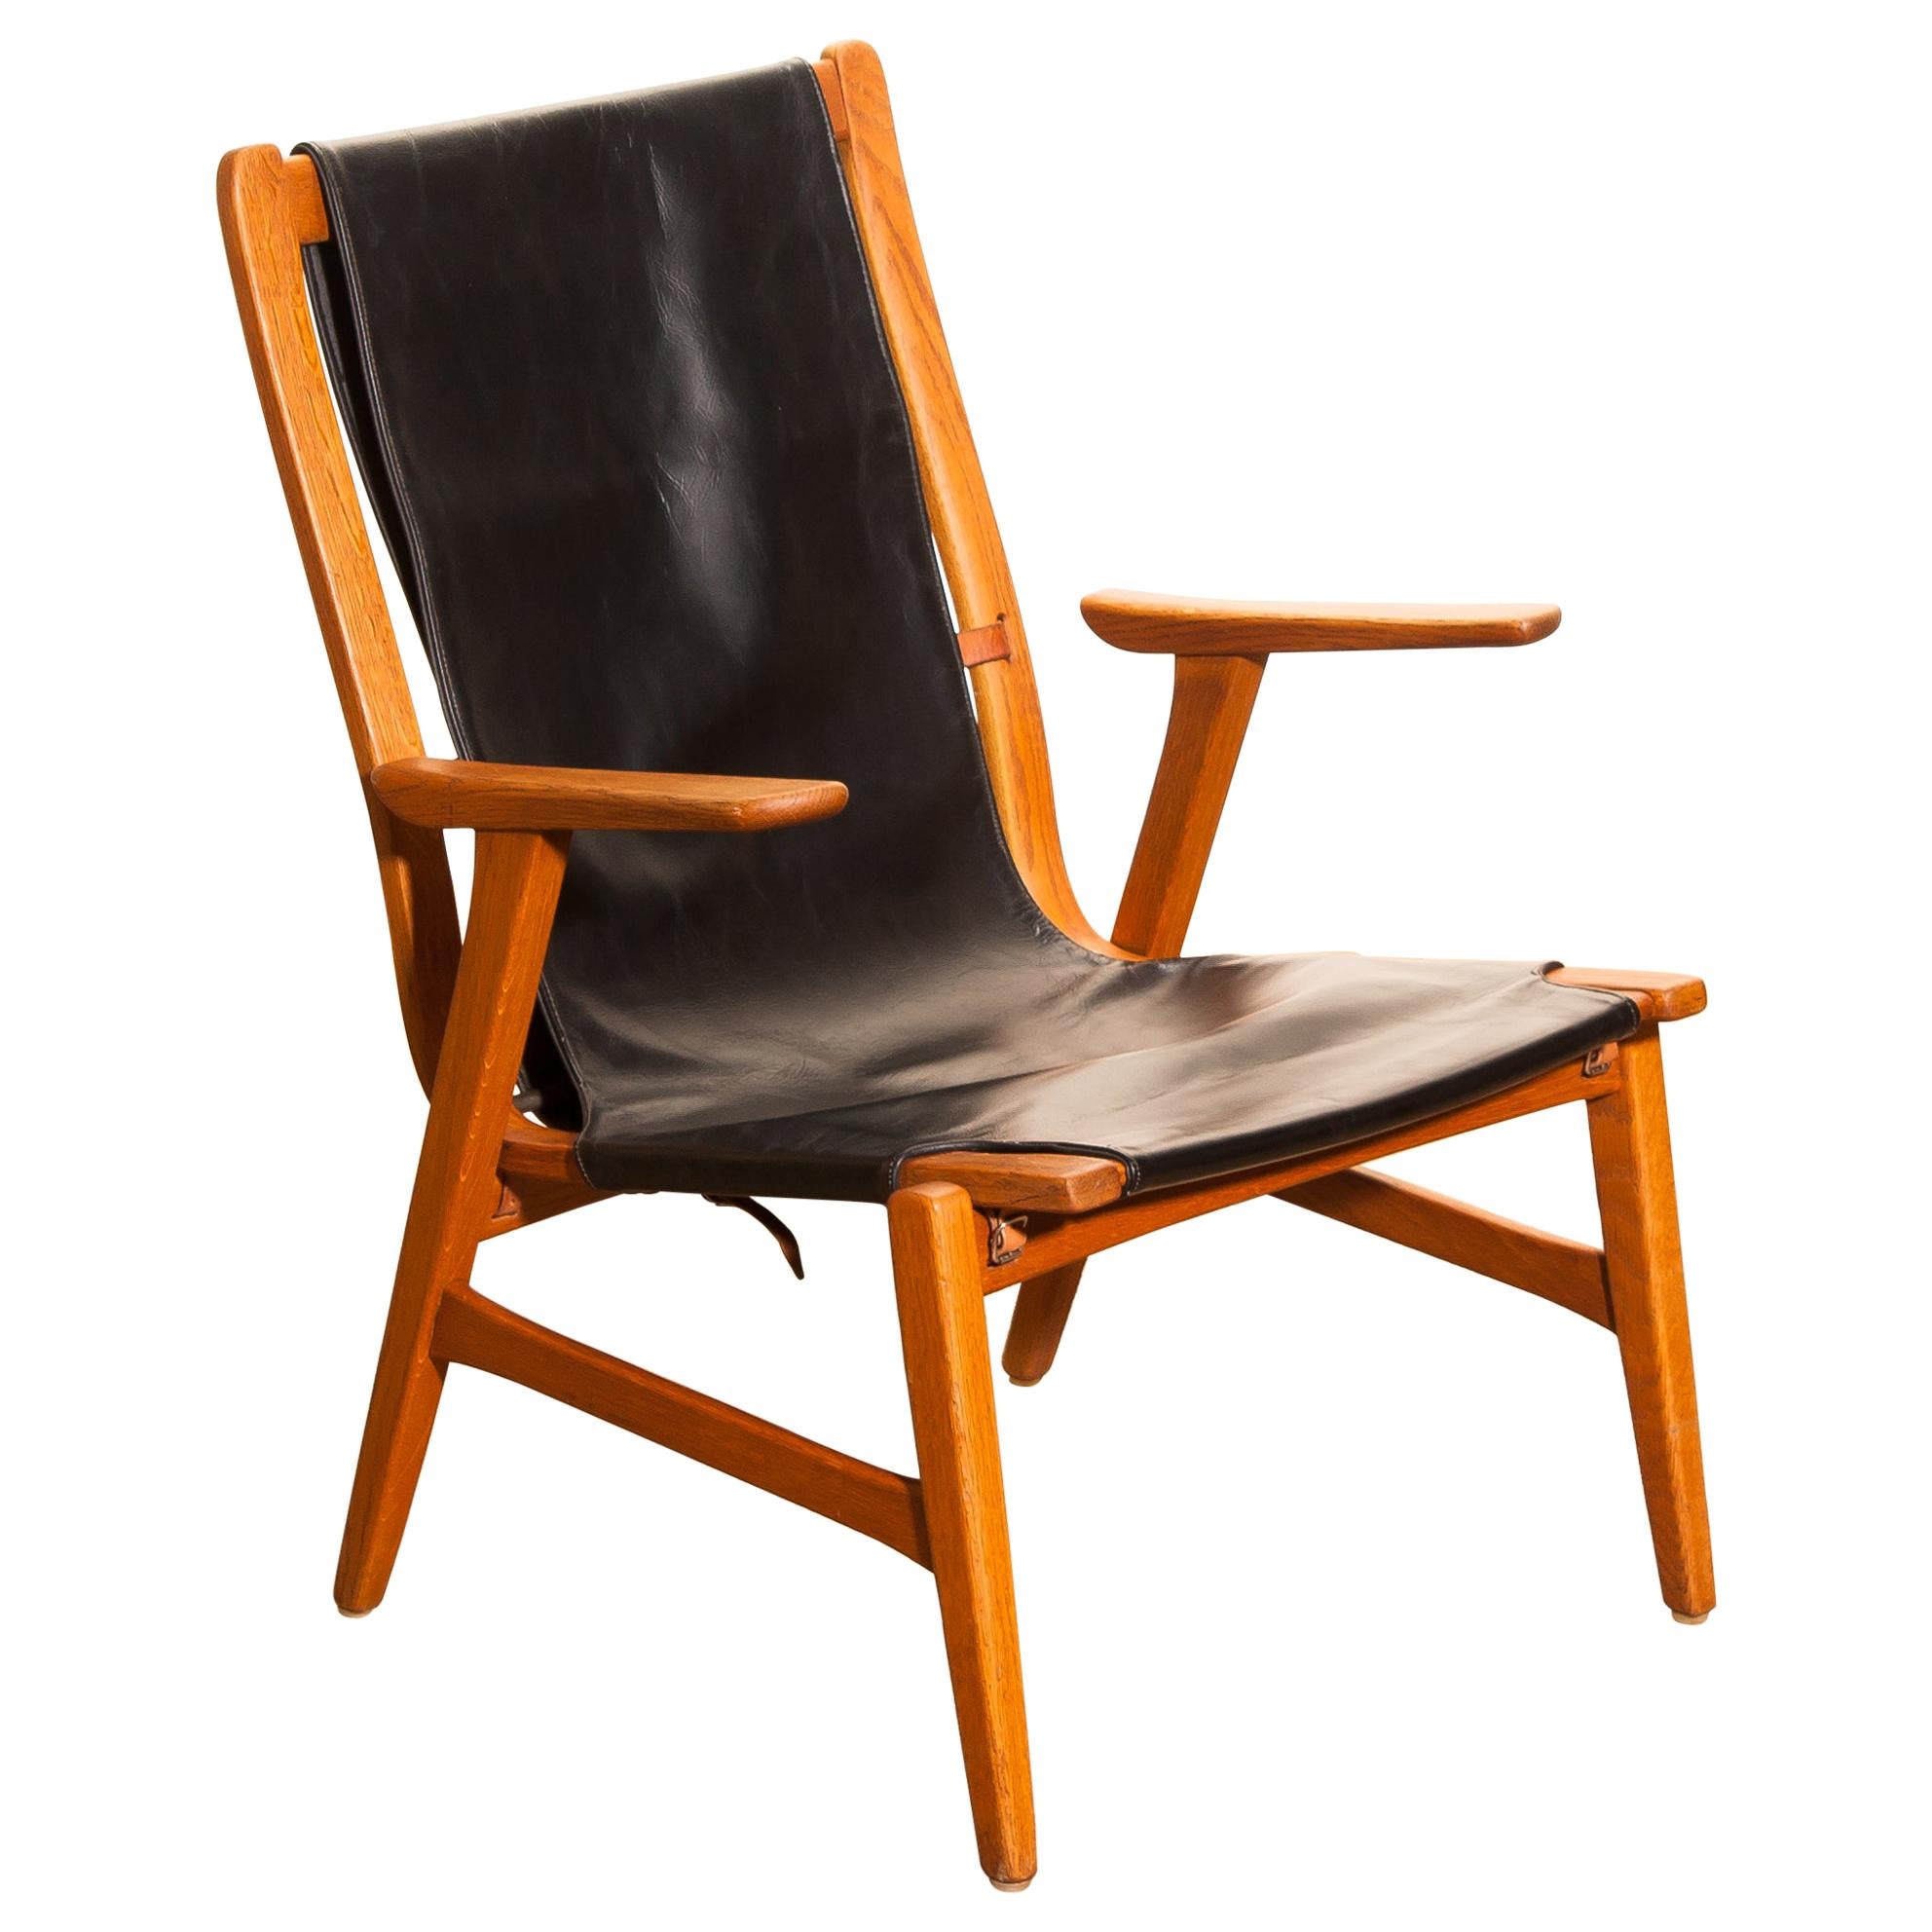 Mid-20th Century 1950s, Oak and Leatherette Hunting Lounge Chair 'Ulrika' by Östen Kristiansson